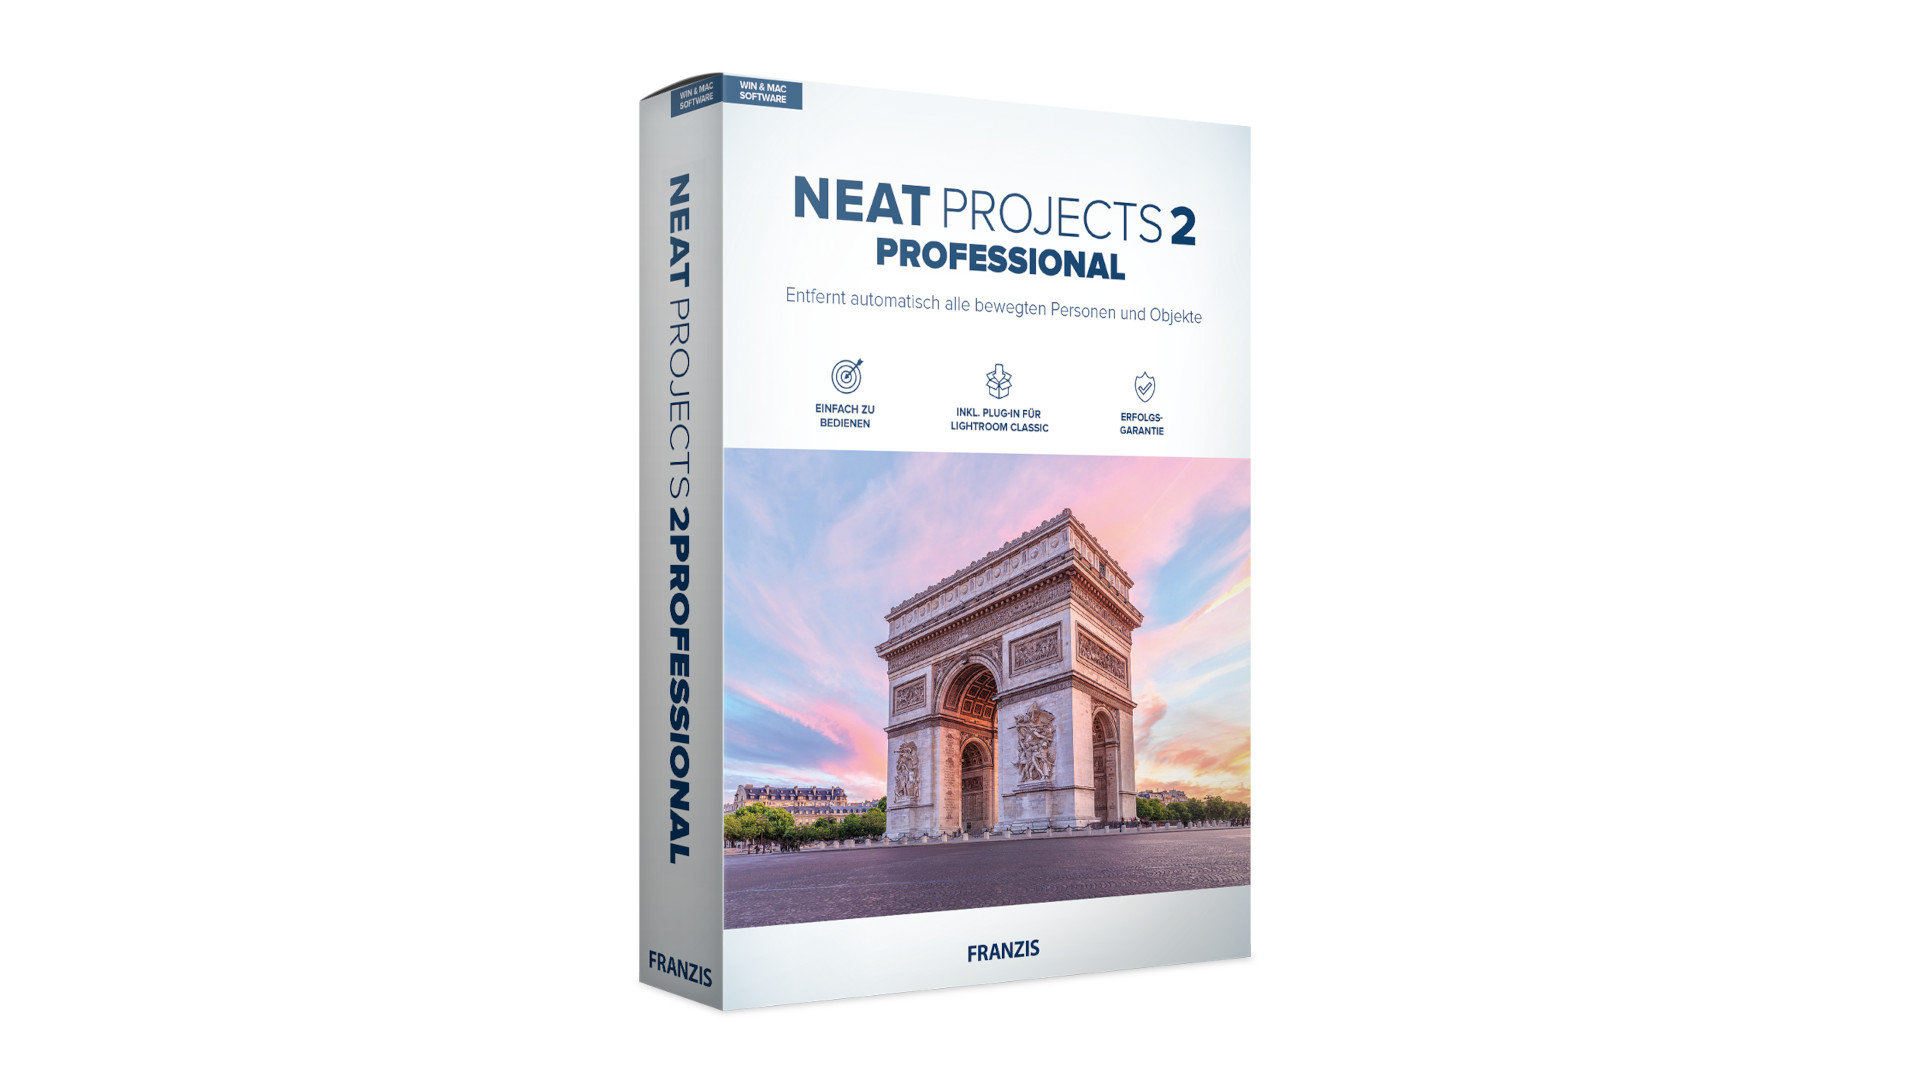 NEAT projects 2 Pro - Project Software Key (Lifetime / 1 PC) [USD 33.89]